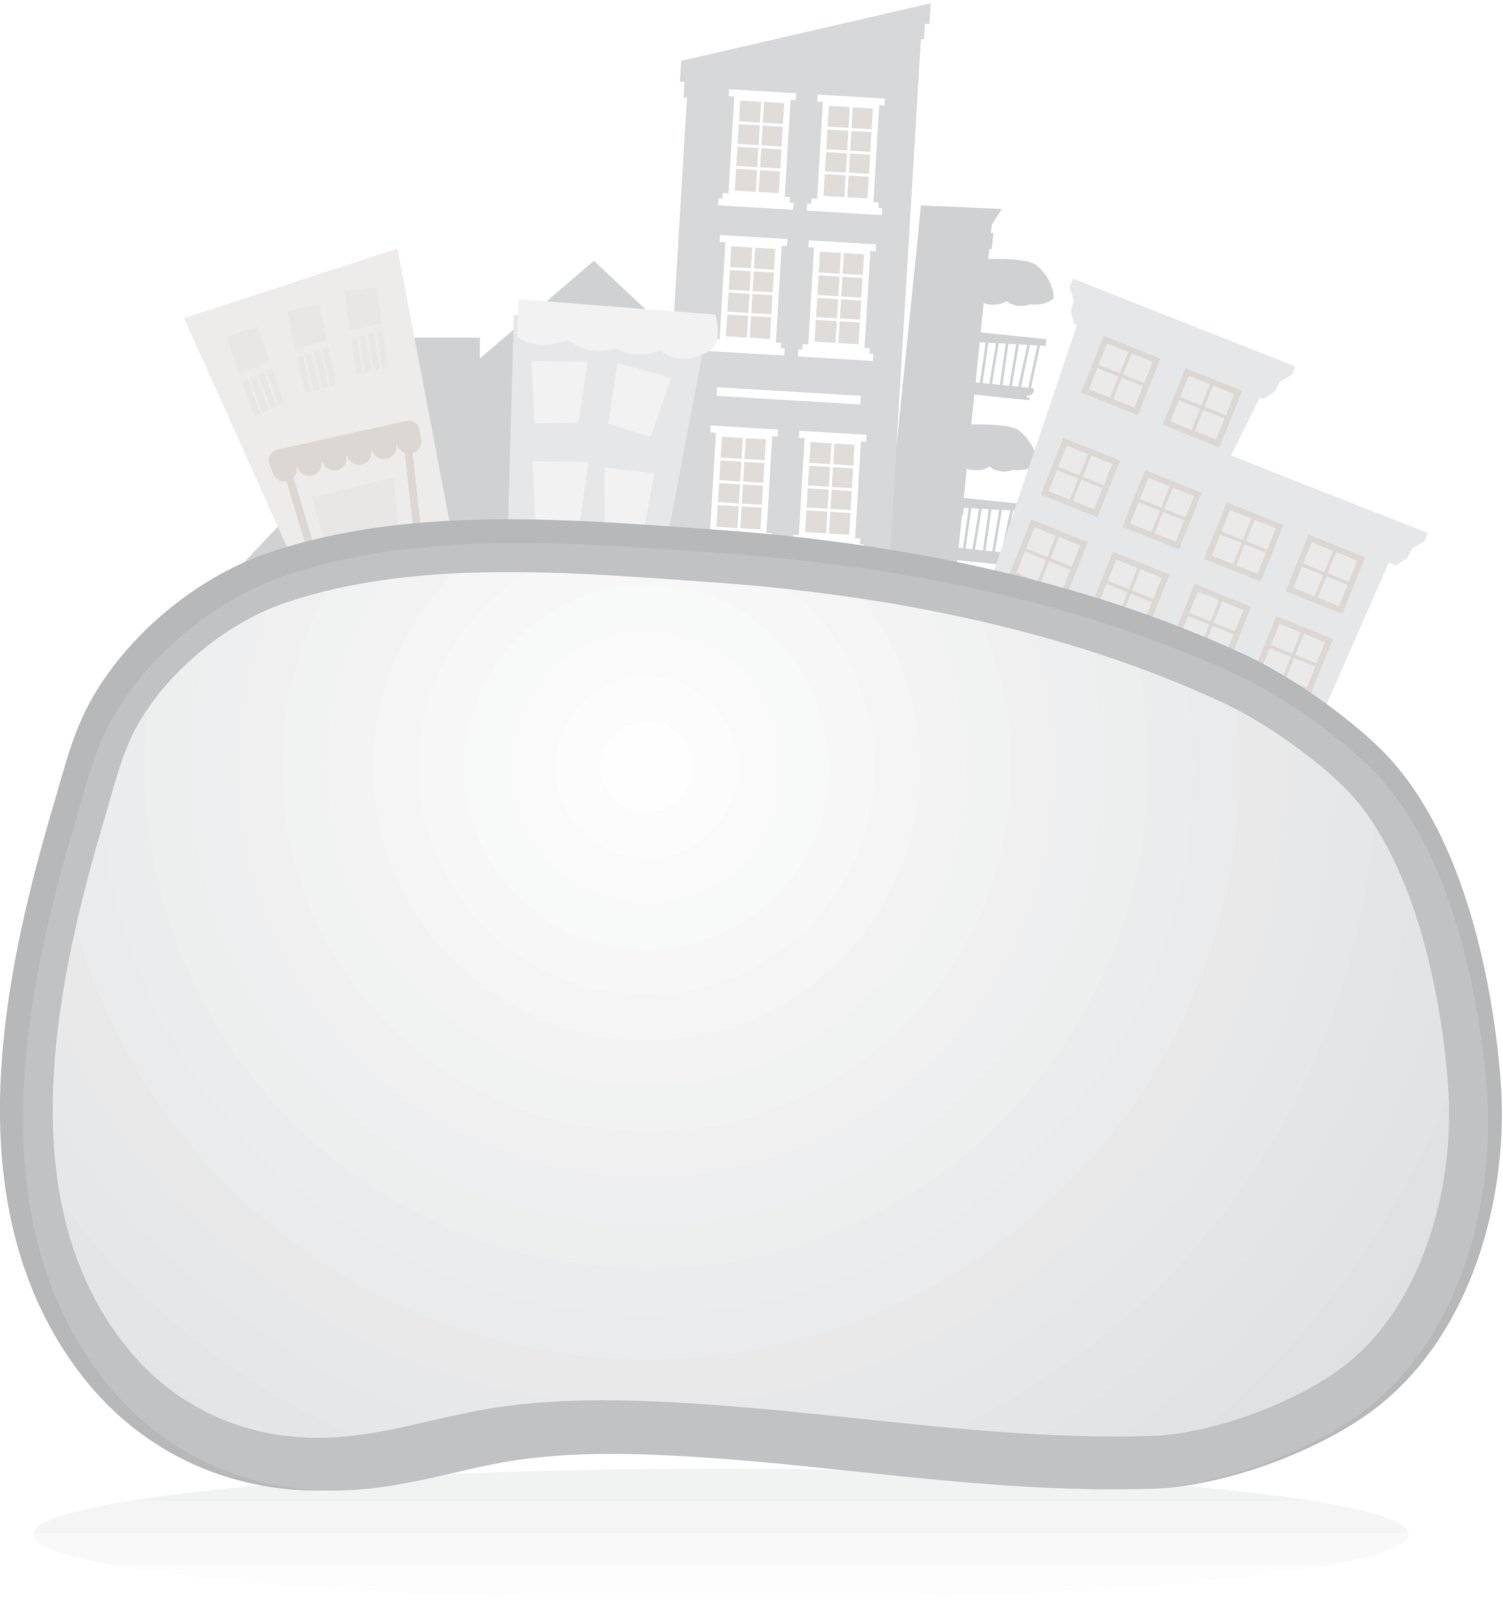 grey buildings background with oval empty space